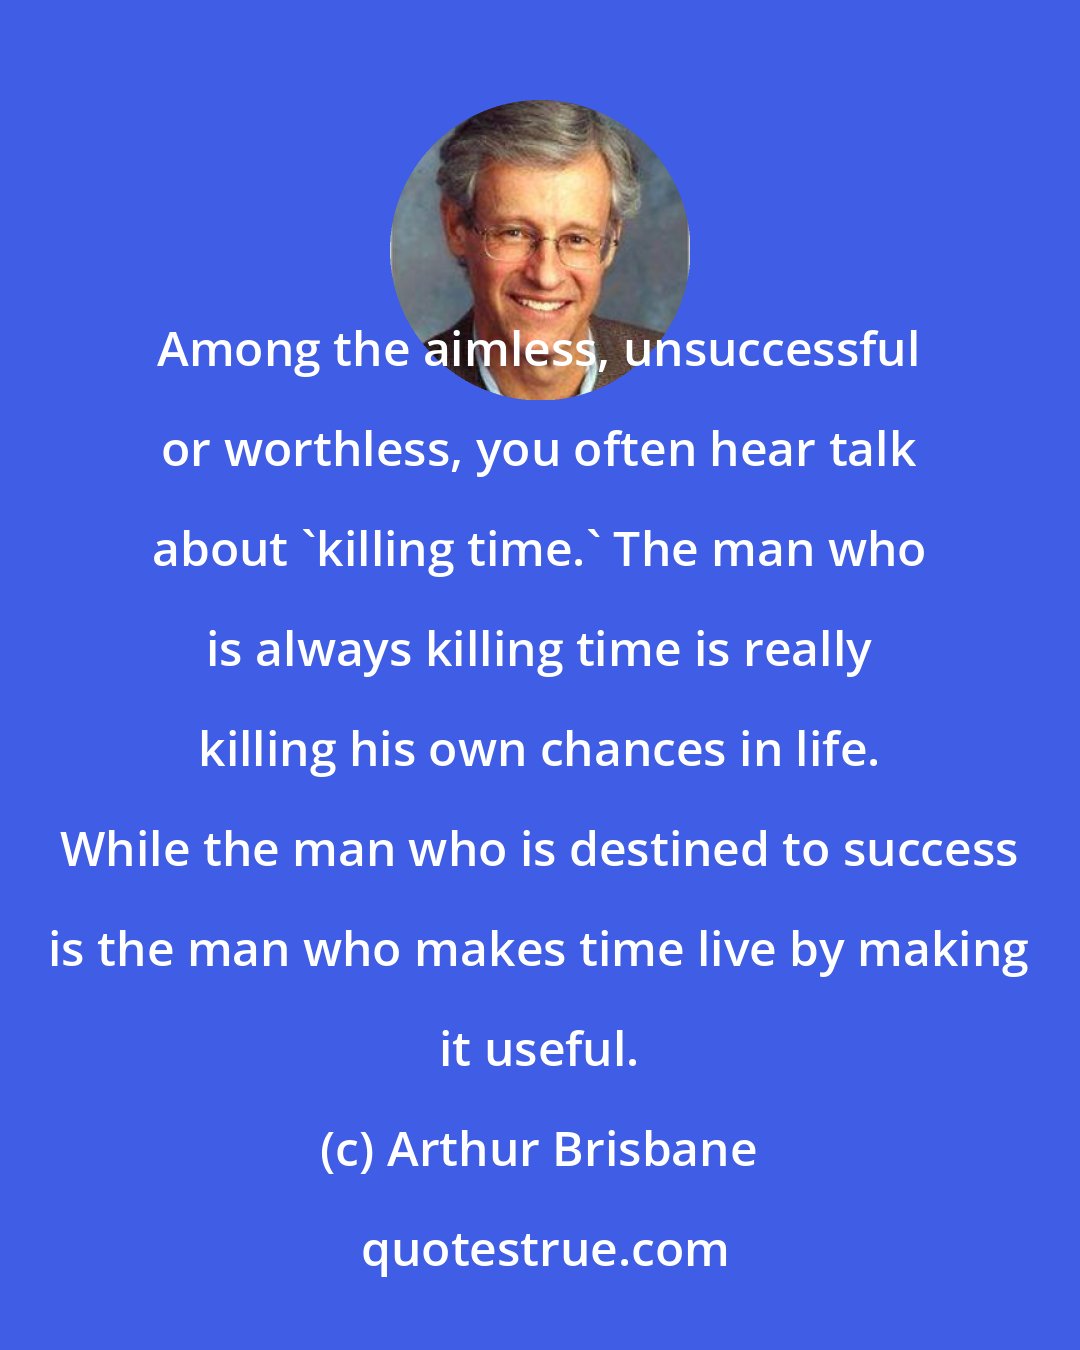 Arthur Brisbane: Among the aimless, unsuccessful or worthless, you often hear talk about 'killing time.' The man who is always killing time is really killing his own chances in life. While the man who is destined to success is the man who makes time live by making it useful.